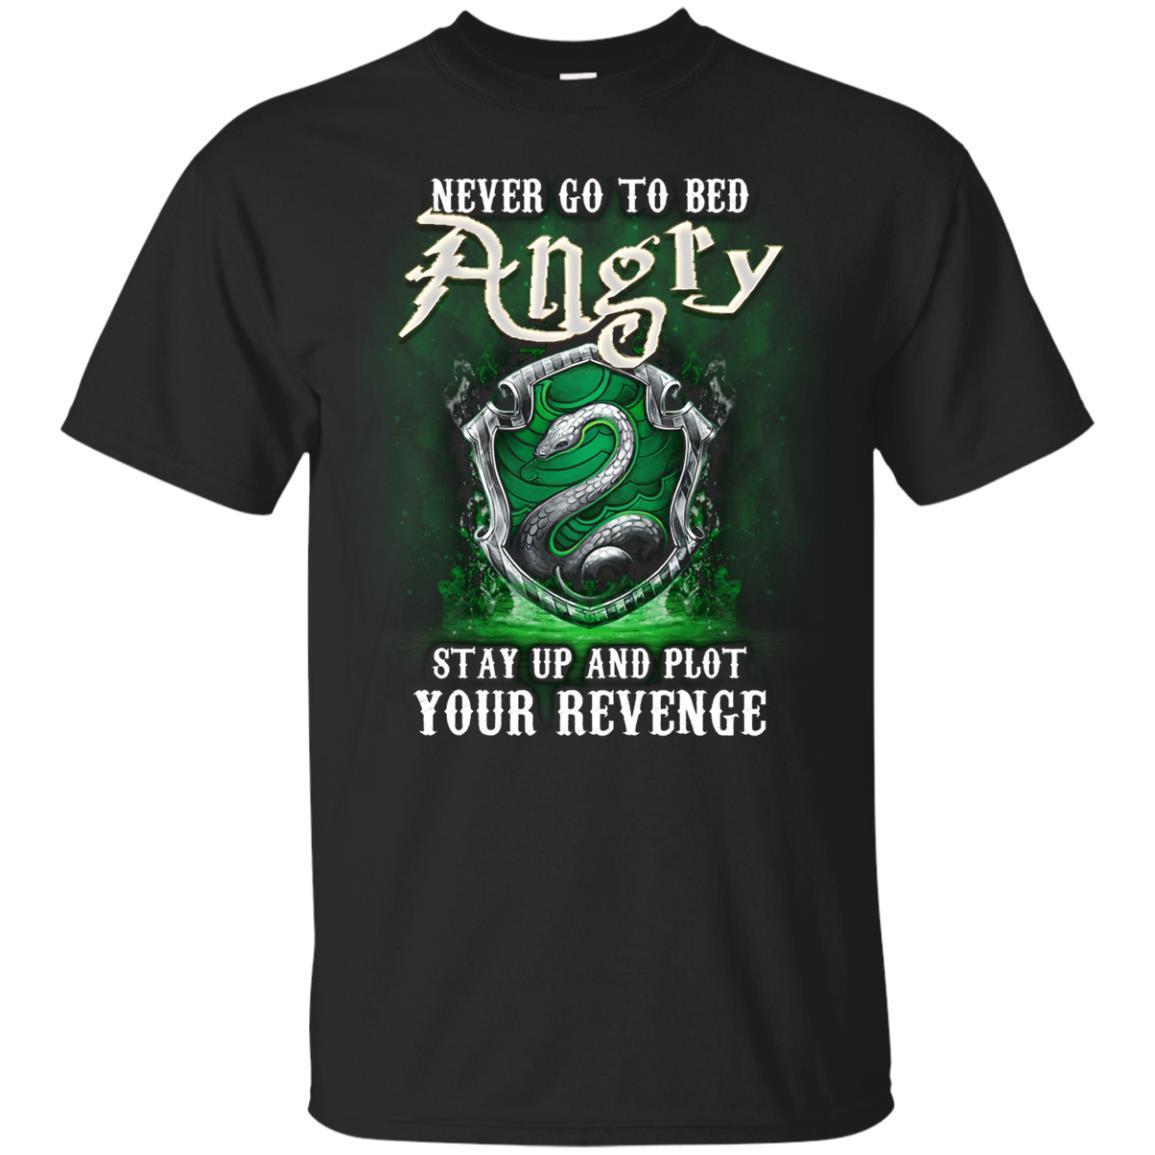 Never Go To Bed Angry Stay Up And Plot Your Revenge Slytherin House Harry Potter Fan Shirt Black S 